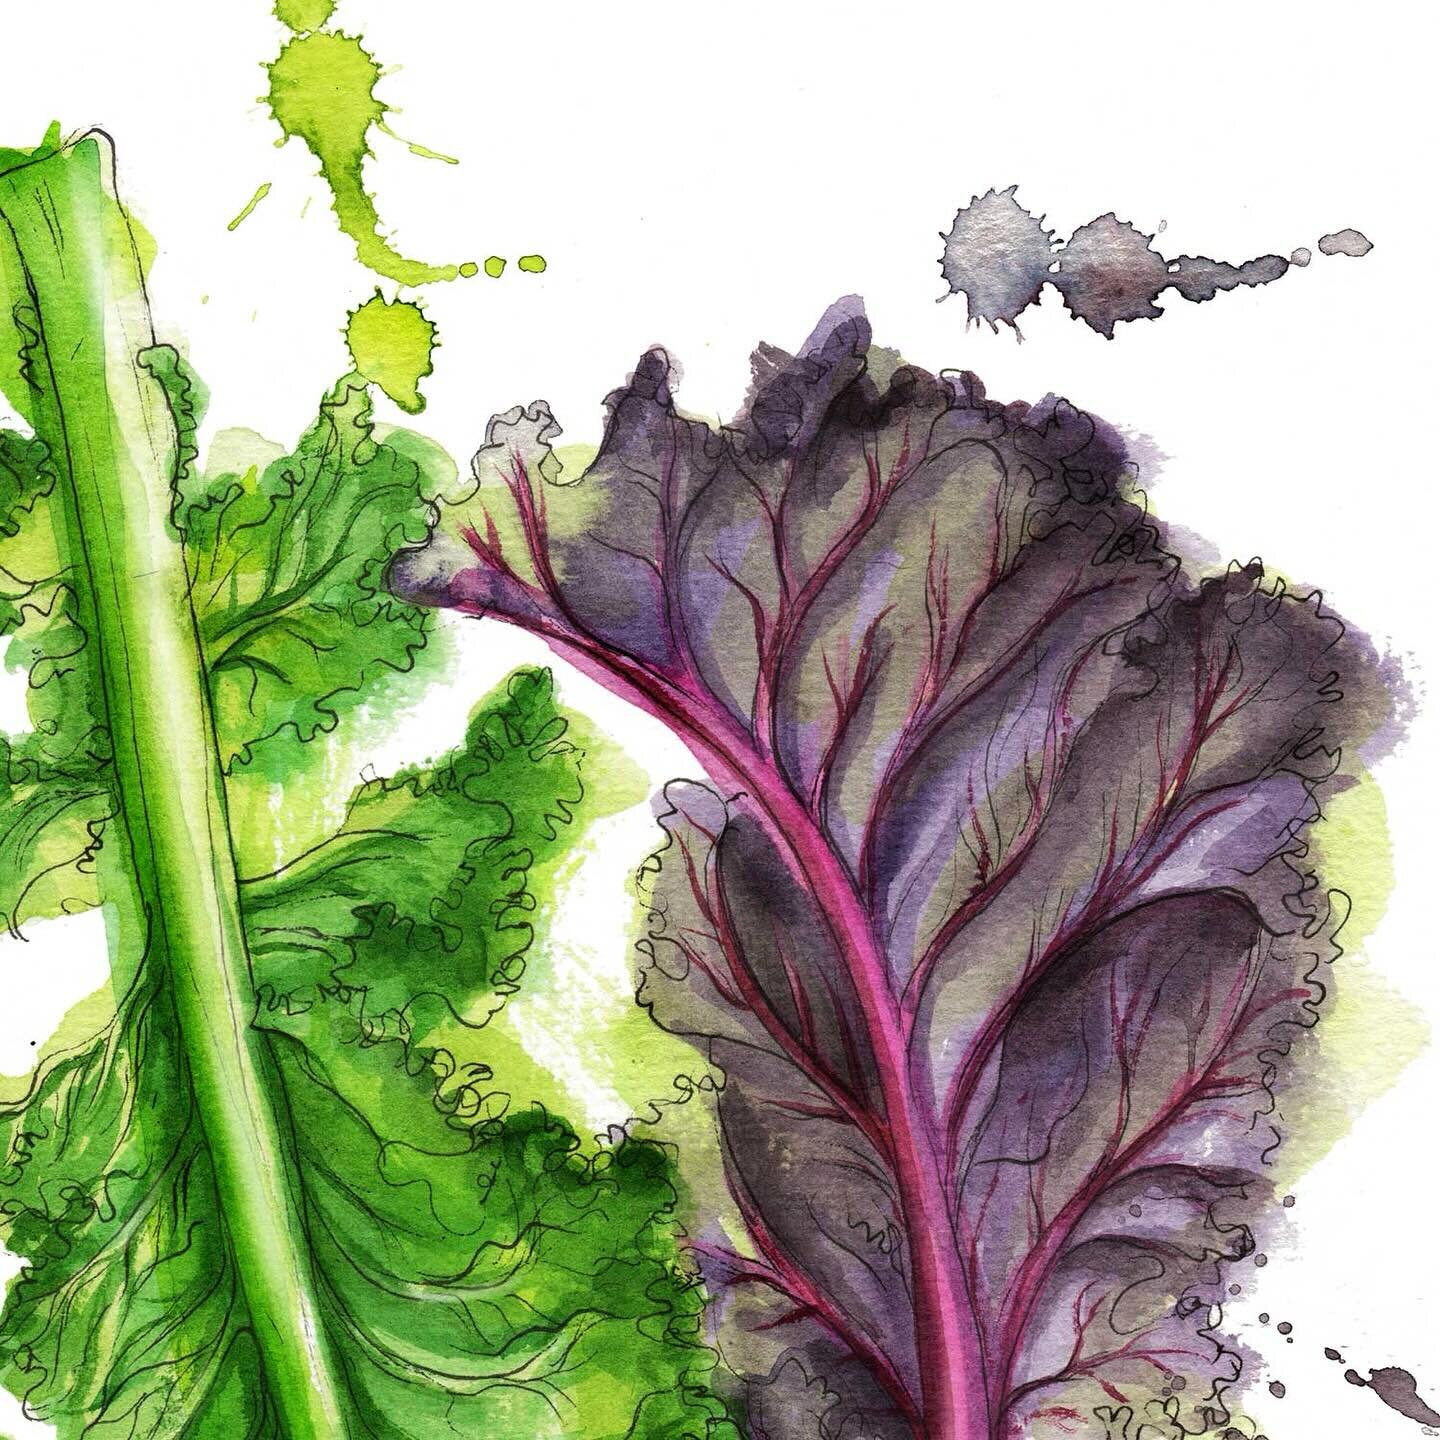 &lsquo;Kalemonath&rsquo; Kale Month is what the Anglo-Saxons called February&hellip; 🥬 illustrated for Seasoning, out in just a month! 

#bookdesign #cookbookillustration #nonfictionlustration #foodillustration #bookillustration #bookstergram #bookp